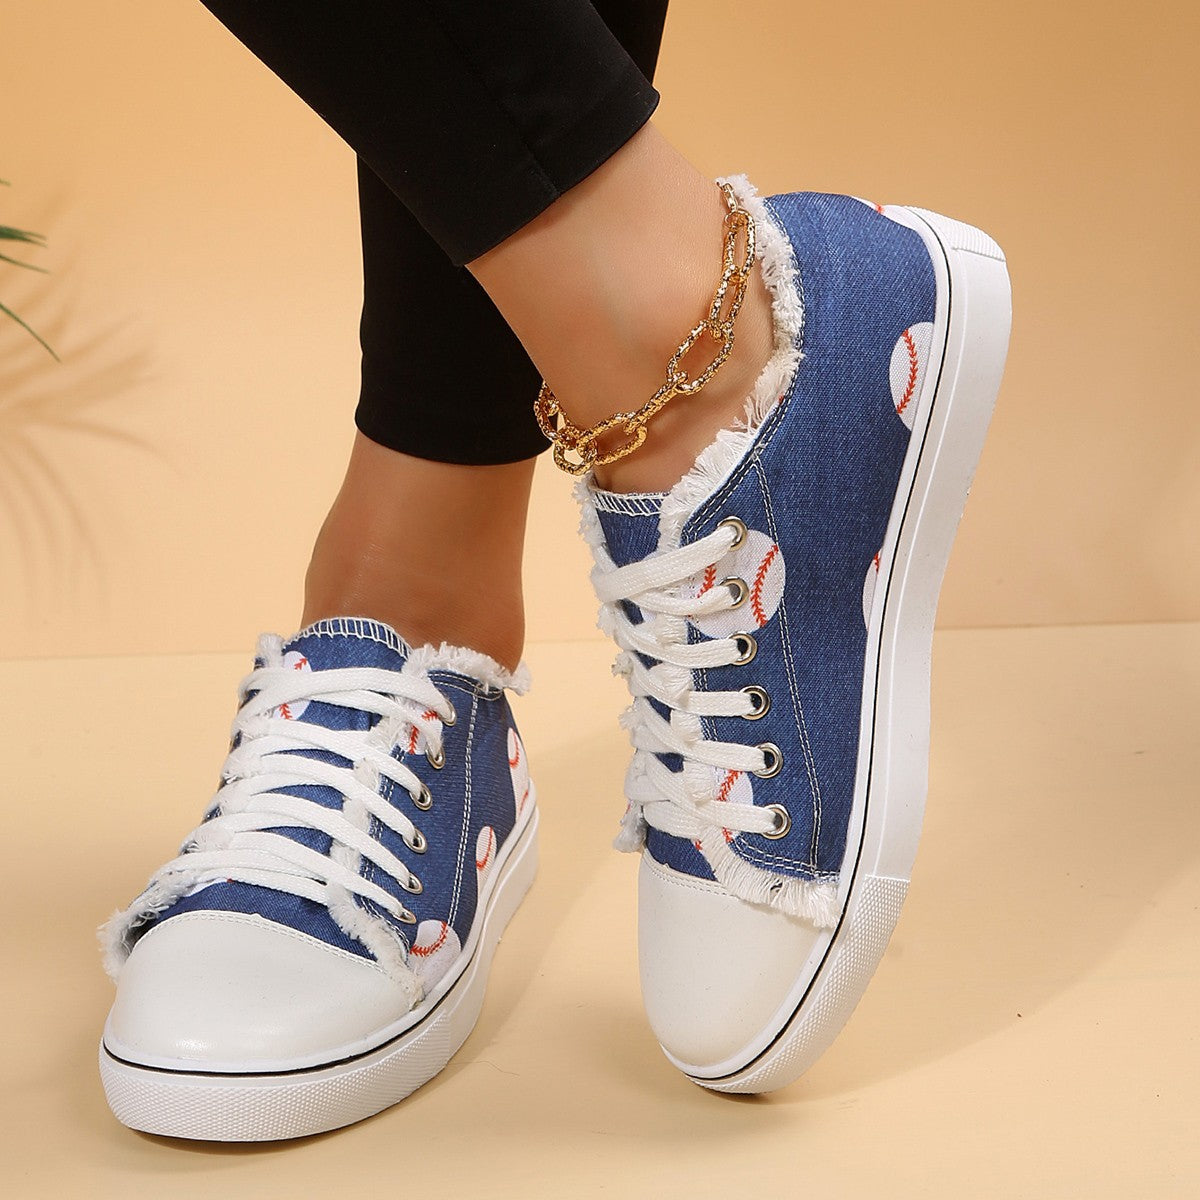 Casual Flat Canvas Shoes Flowers Lace-up Flowers Print Loafers Women Walking Shoes